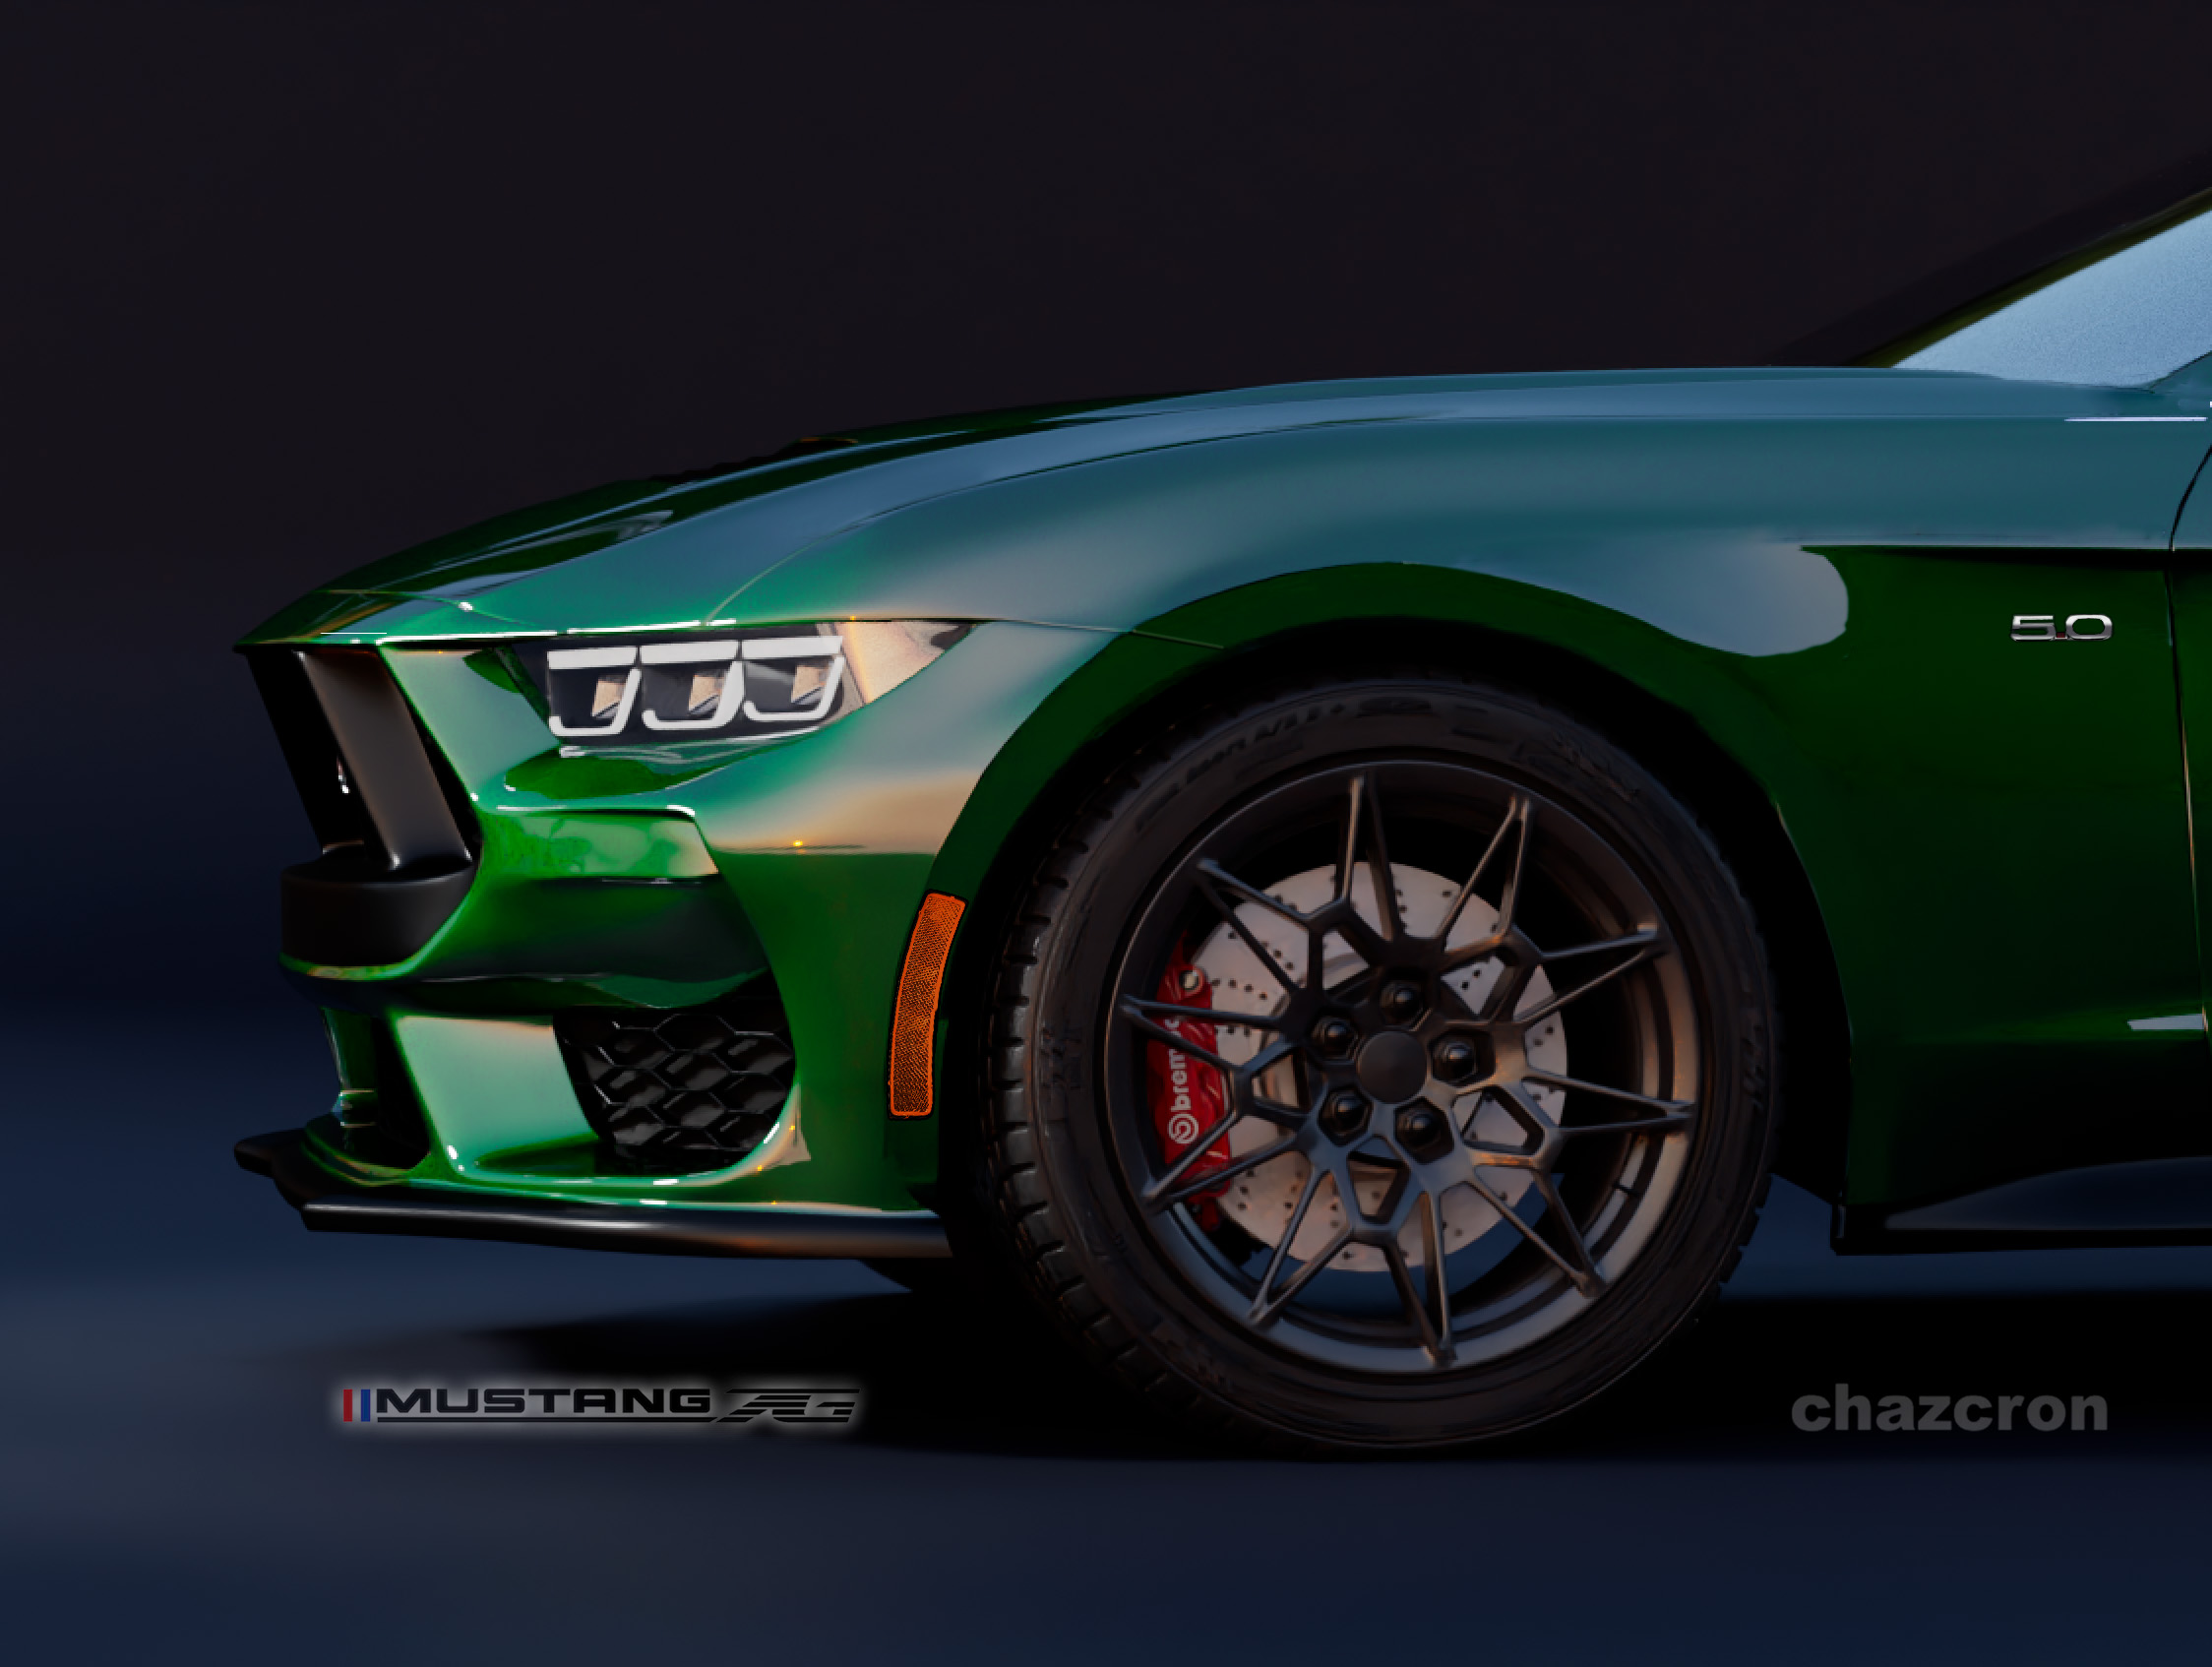 S650 Mustang S650 Mustang GT gets new badge design and loses black trunk trim - revealed in latest Stampede teaser 06BA0117-4CEC-4B1C-A0E6-363572C7DBFA